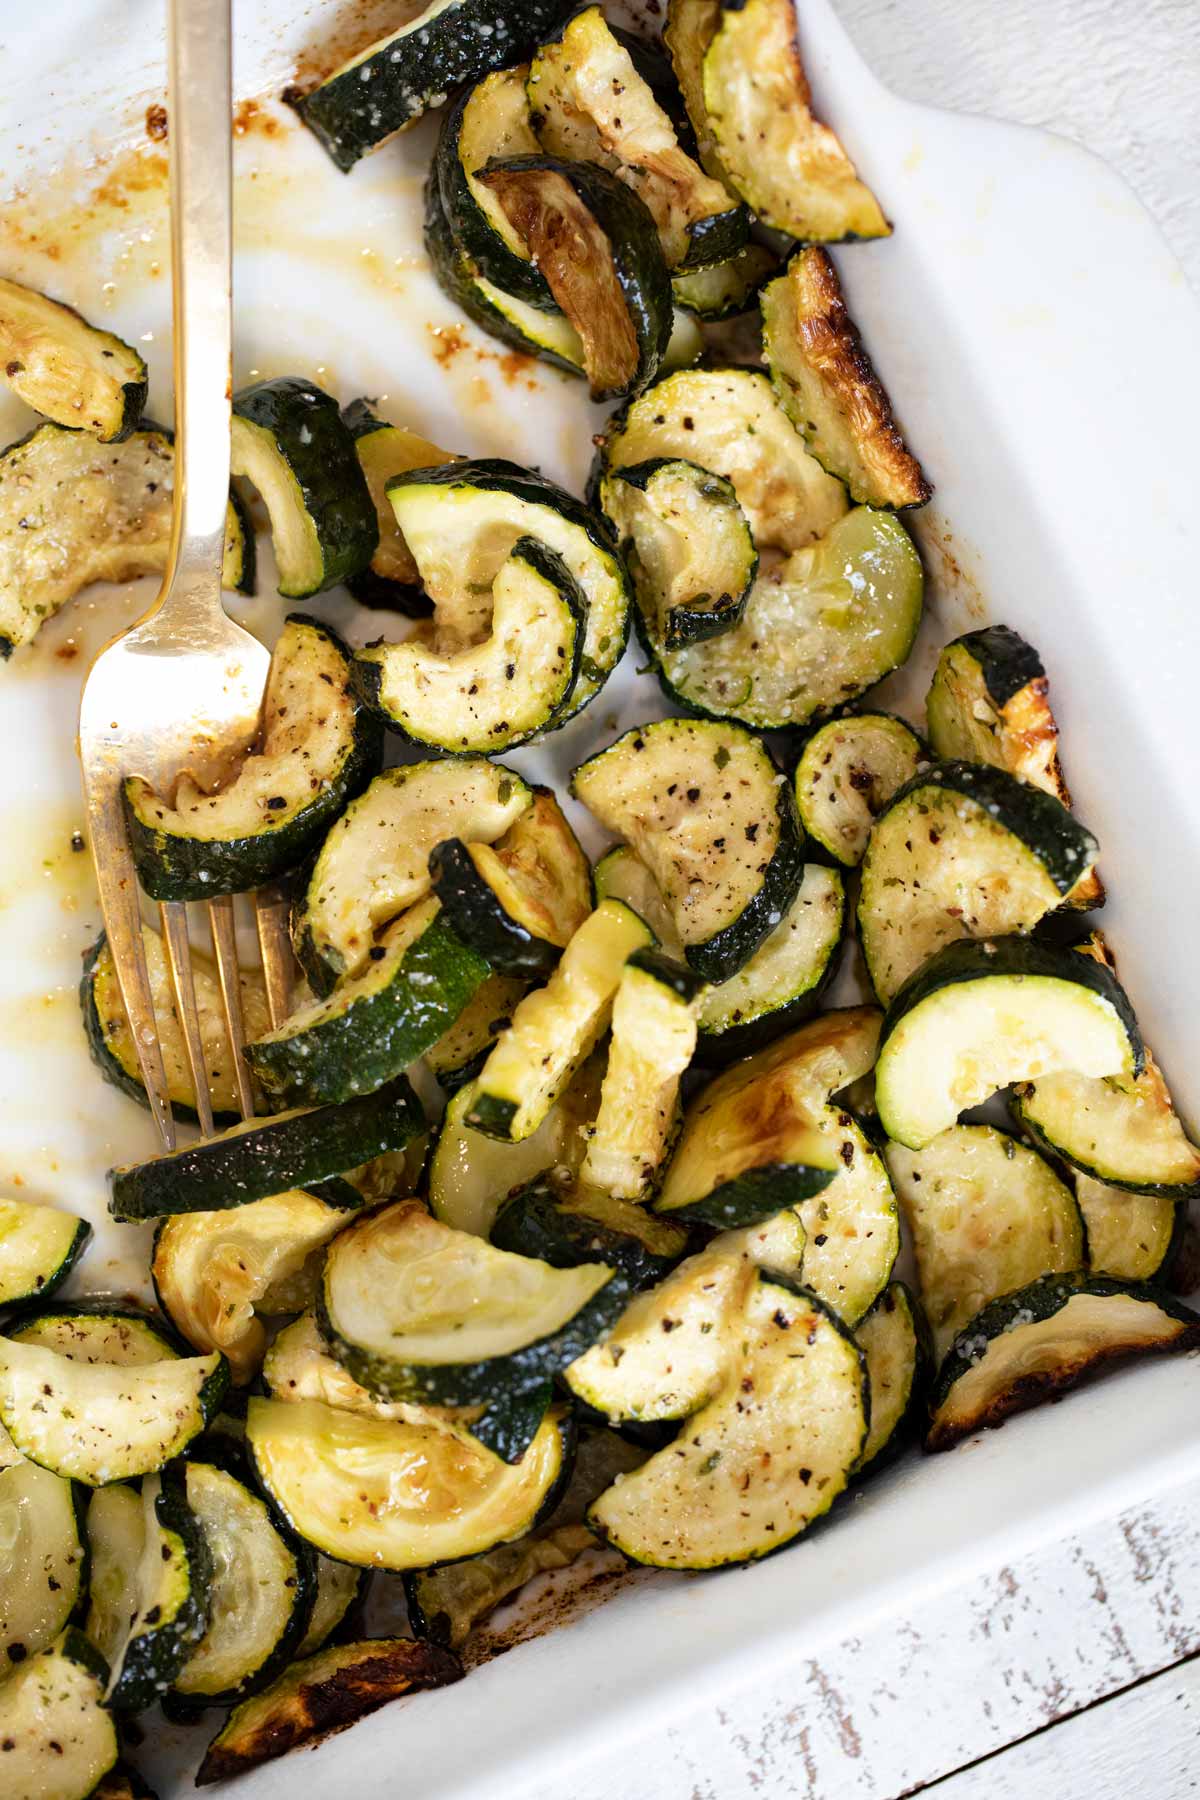 Easy Roasted Zucchini Recipe - Cooking Made Healthy